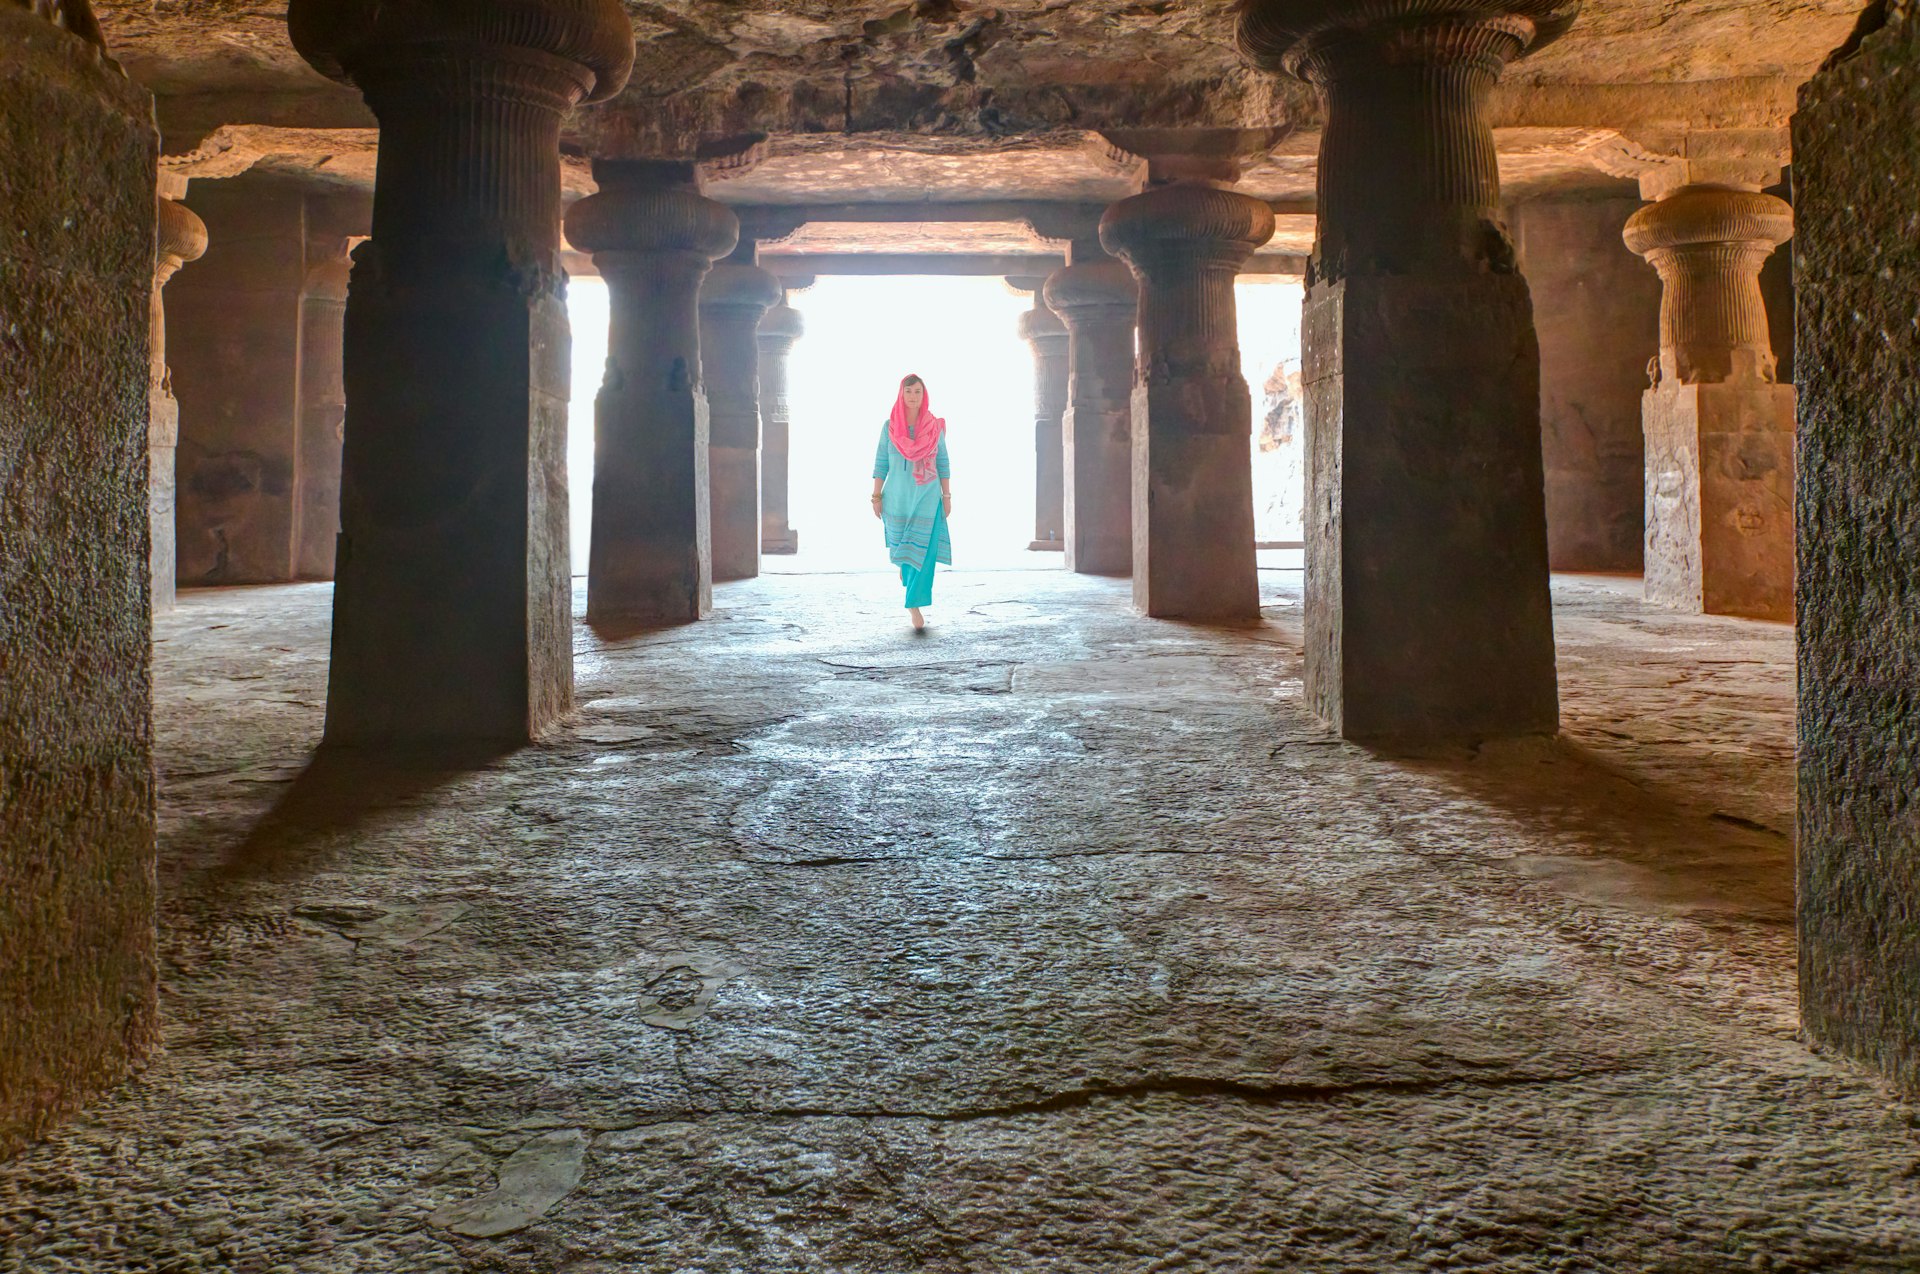 A woman wearing clothes that cover her head, shoulders and down to her ankles, walks through a temple building